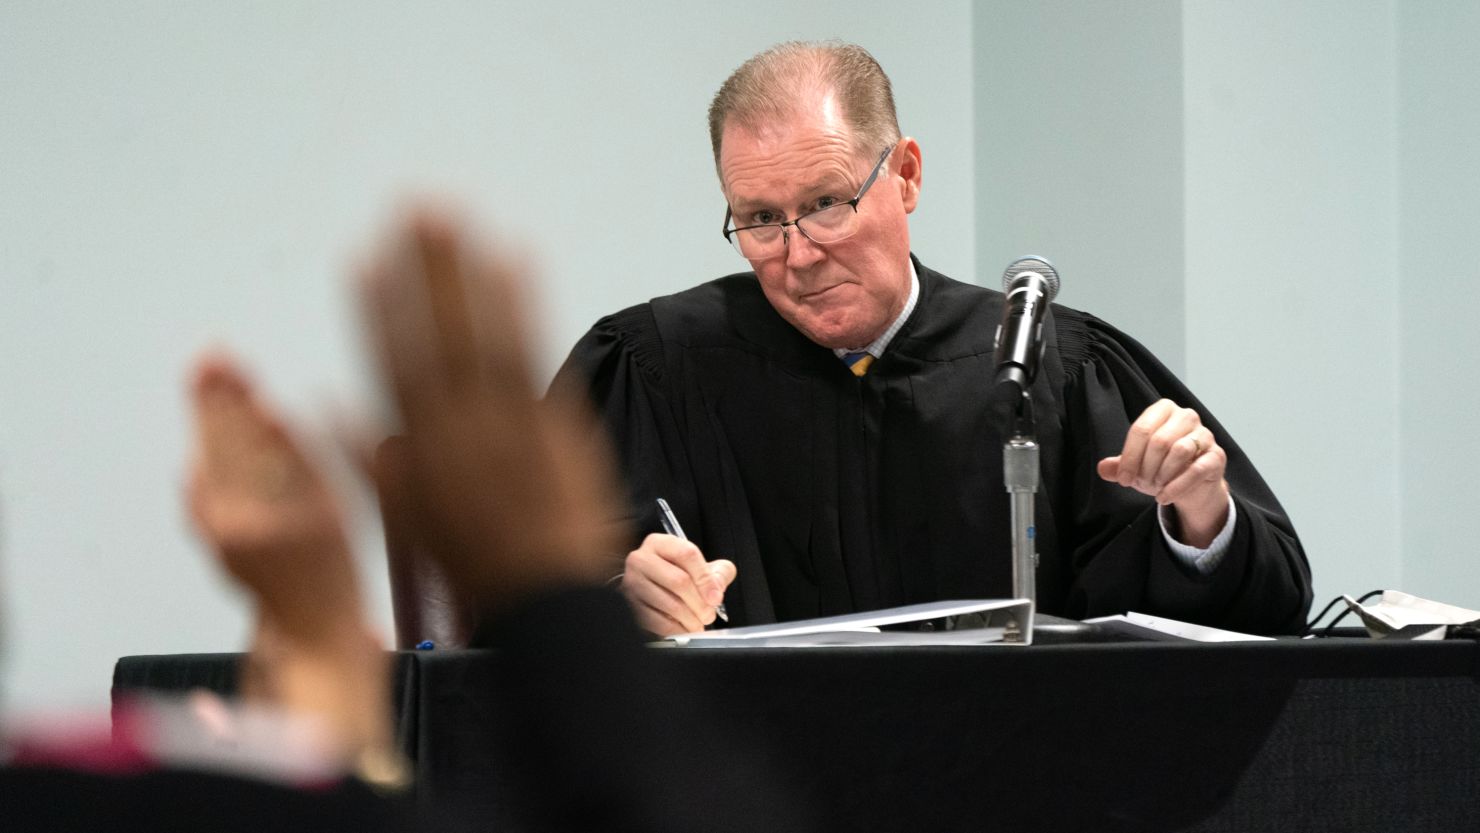 Judge Timothy Walmsley of the Glynn County Superior Court dismissed efforts against approving a nearly all-White jury in the trial of the men charged in Ahmaud Arbery's killing.